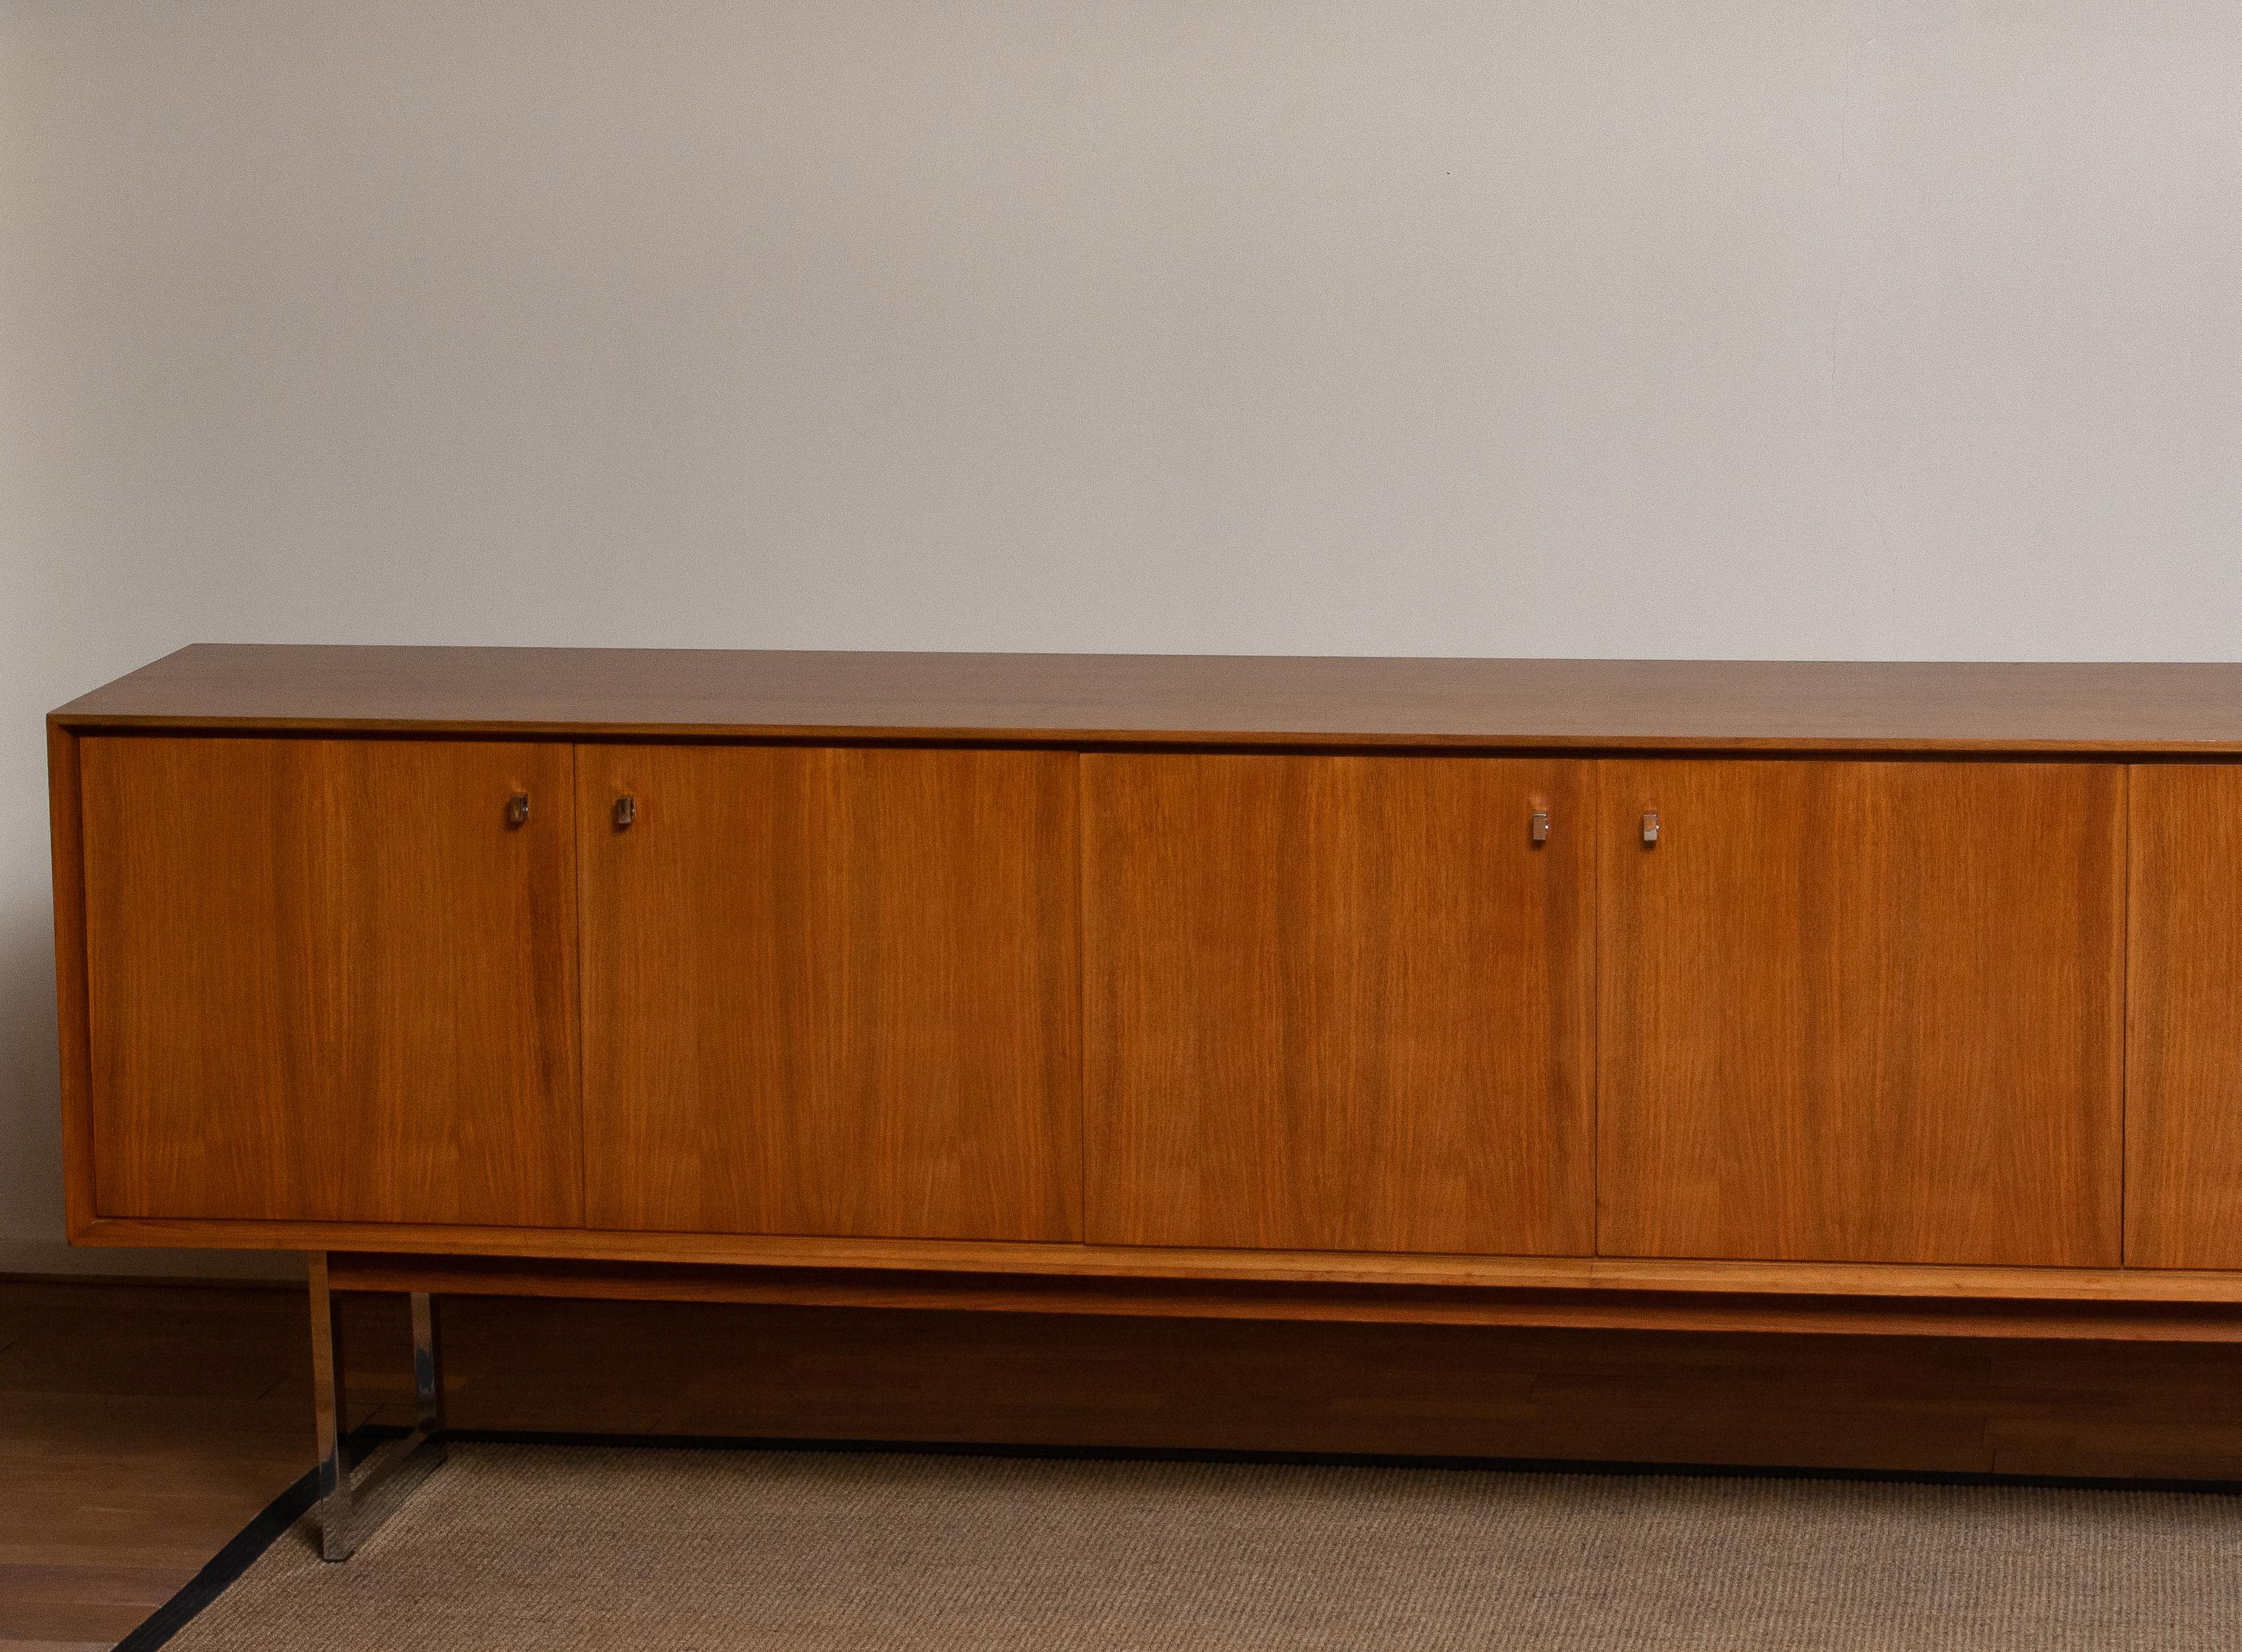 Extreme beautiful and extra wide credenzas / sideboard, 118 inches, in walnut on chrome legs.
It's a great quality piece and the overall condition is very good!
 